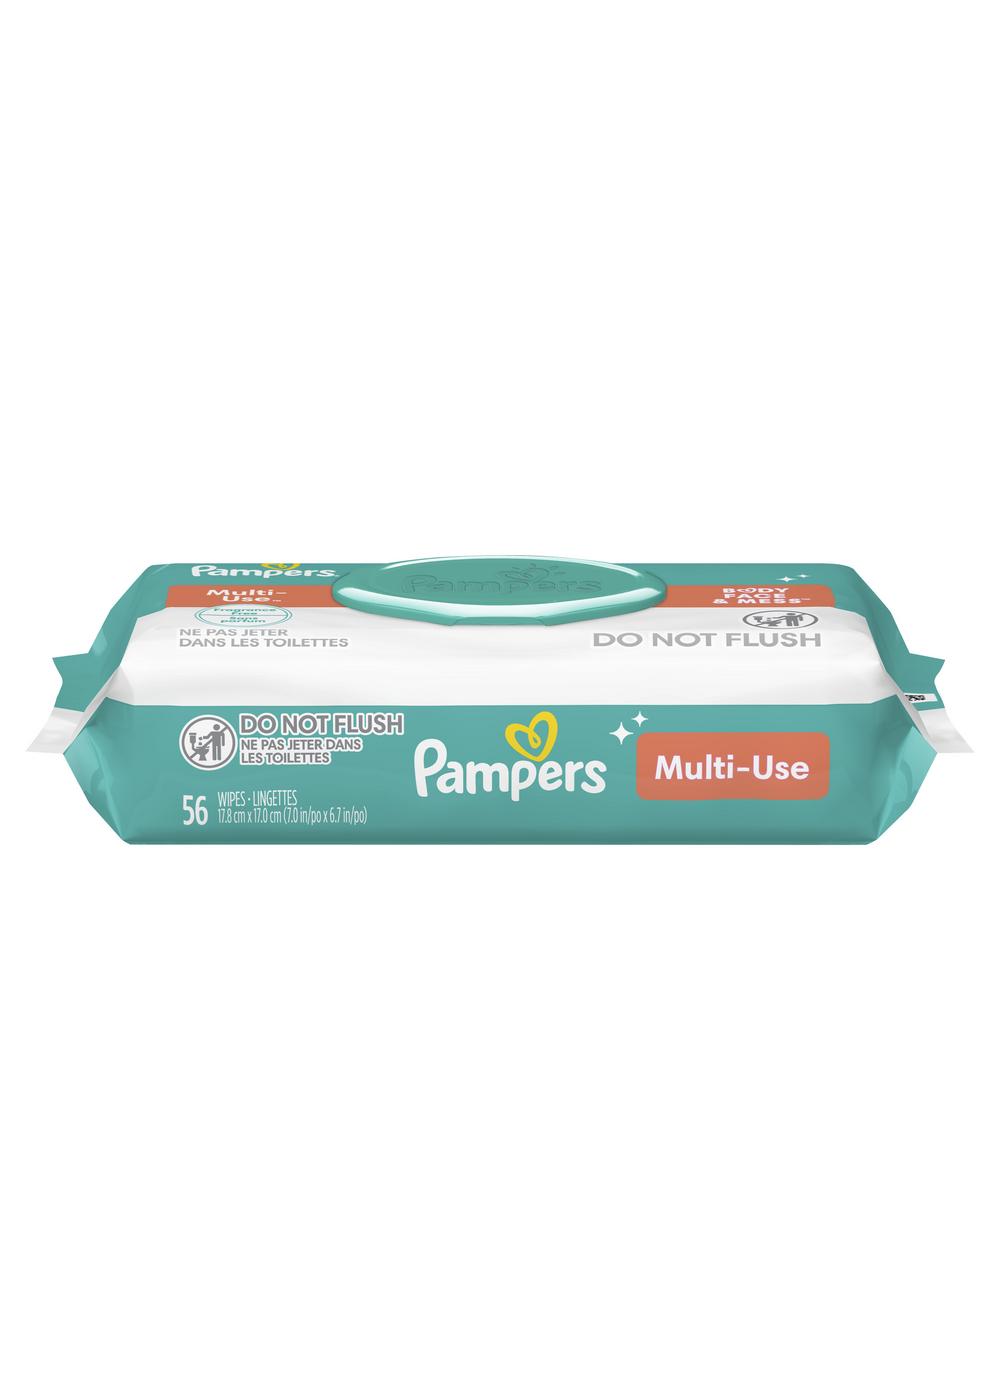 Pampers Multi-Use Baby Wipes - Fragrance Free; image 6 of 7